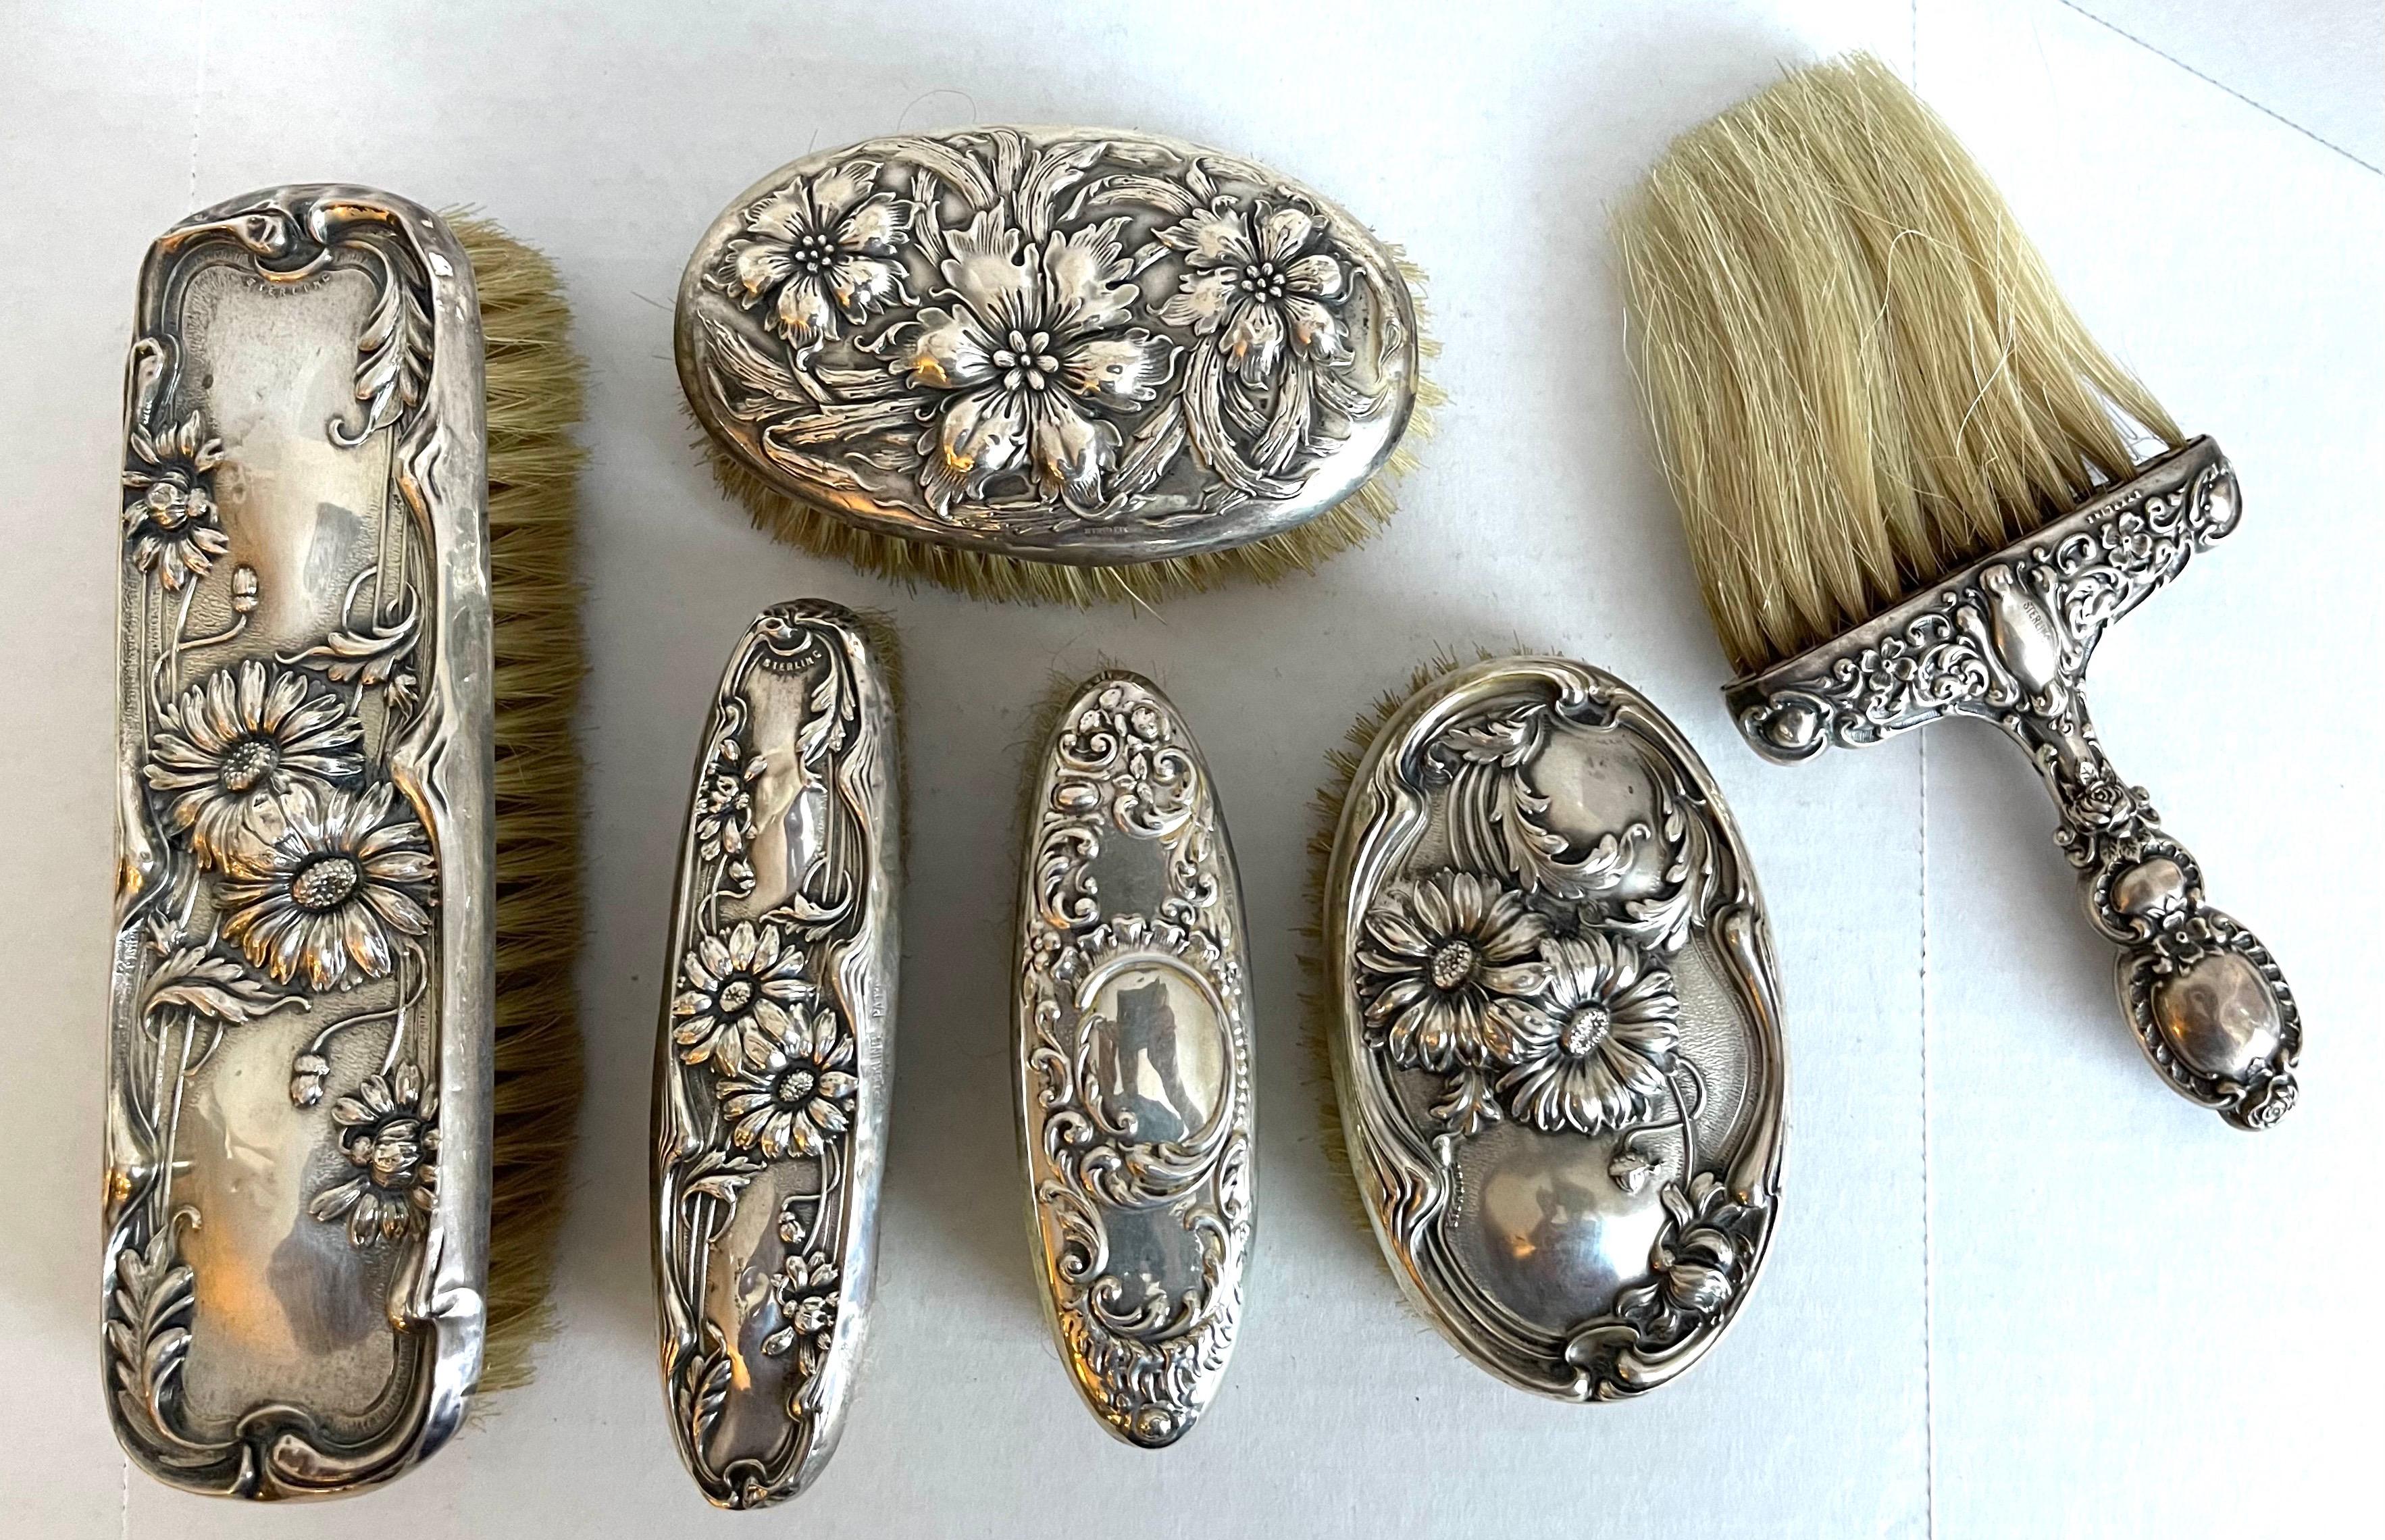 Set of 6 Art Nouveau Sterling silver vanity brushes. American circa 1900. 
All stamped Sterling. Original horsehair bristles. 
Each brush features a slightly different repoussè floral pattern.